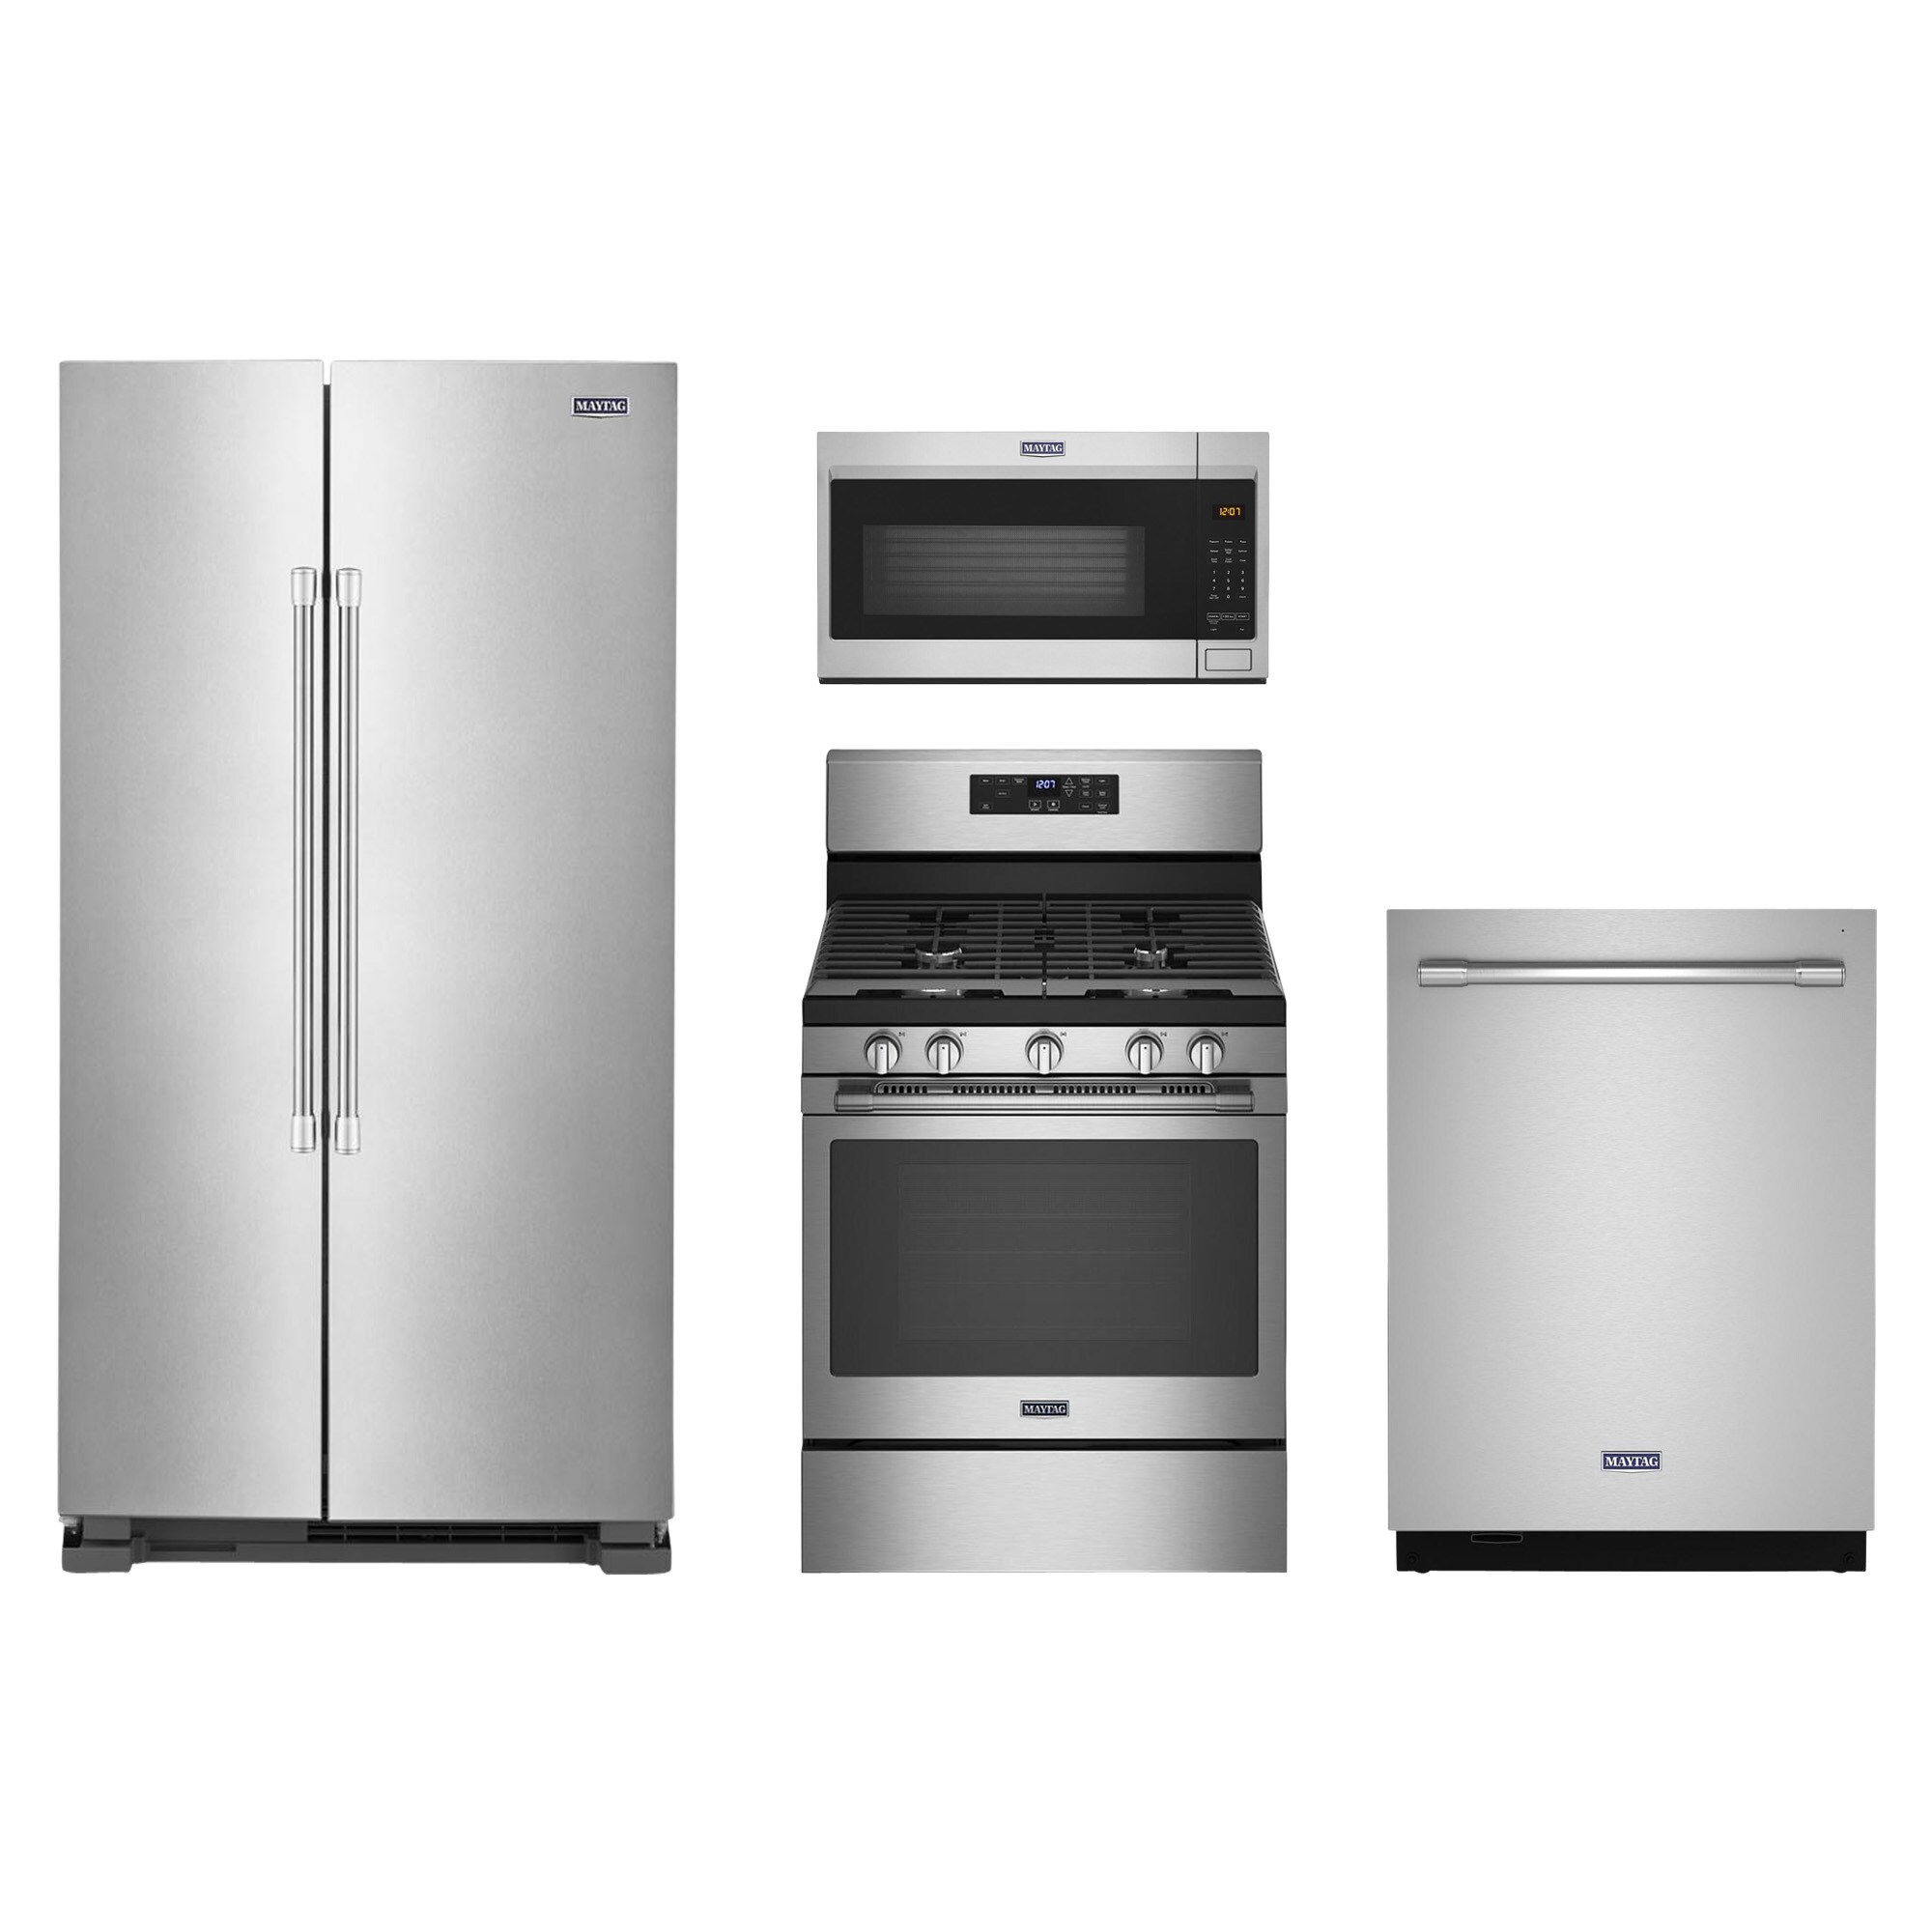 Buy Maytag Over-the-Range Microwave with stainless steel cavity - 1.7 cu.  ft.